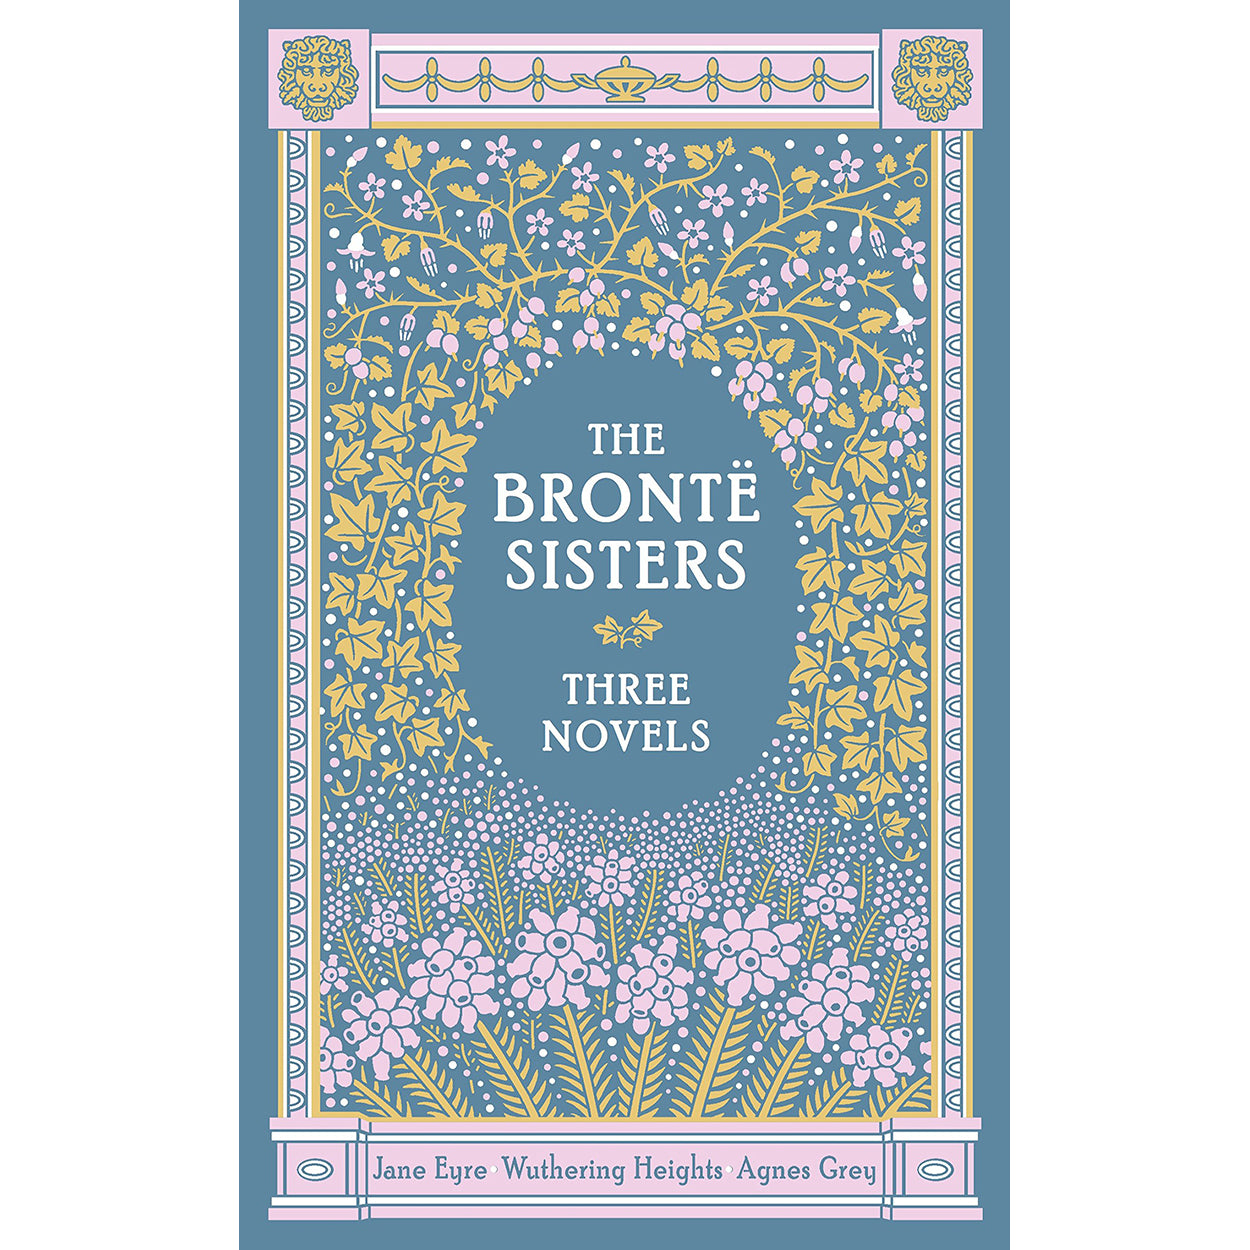 Little Women and Other Novels [Book]